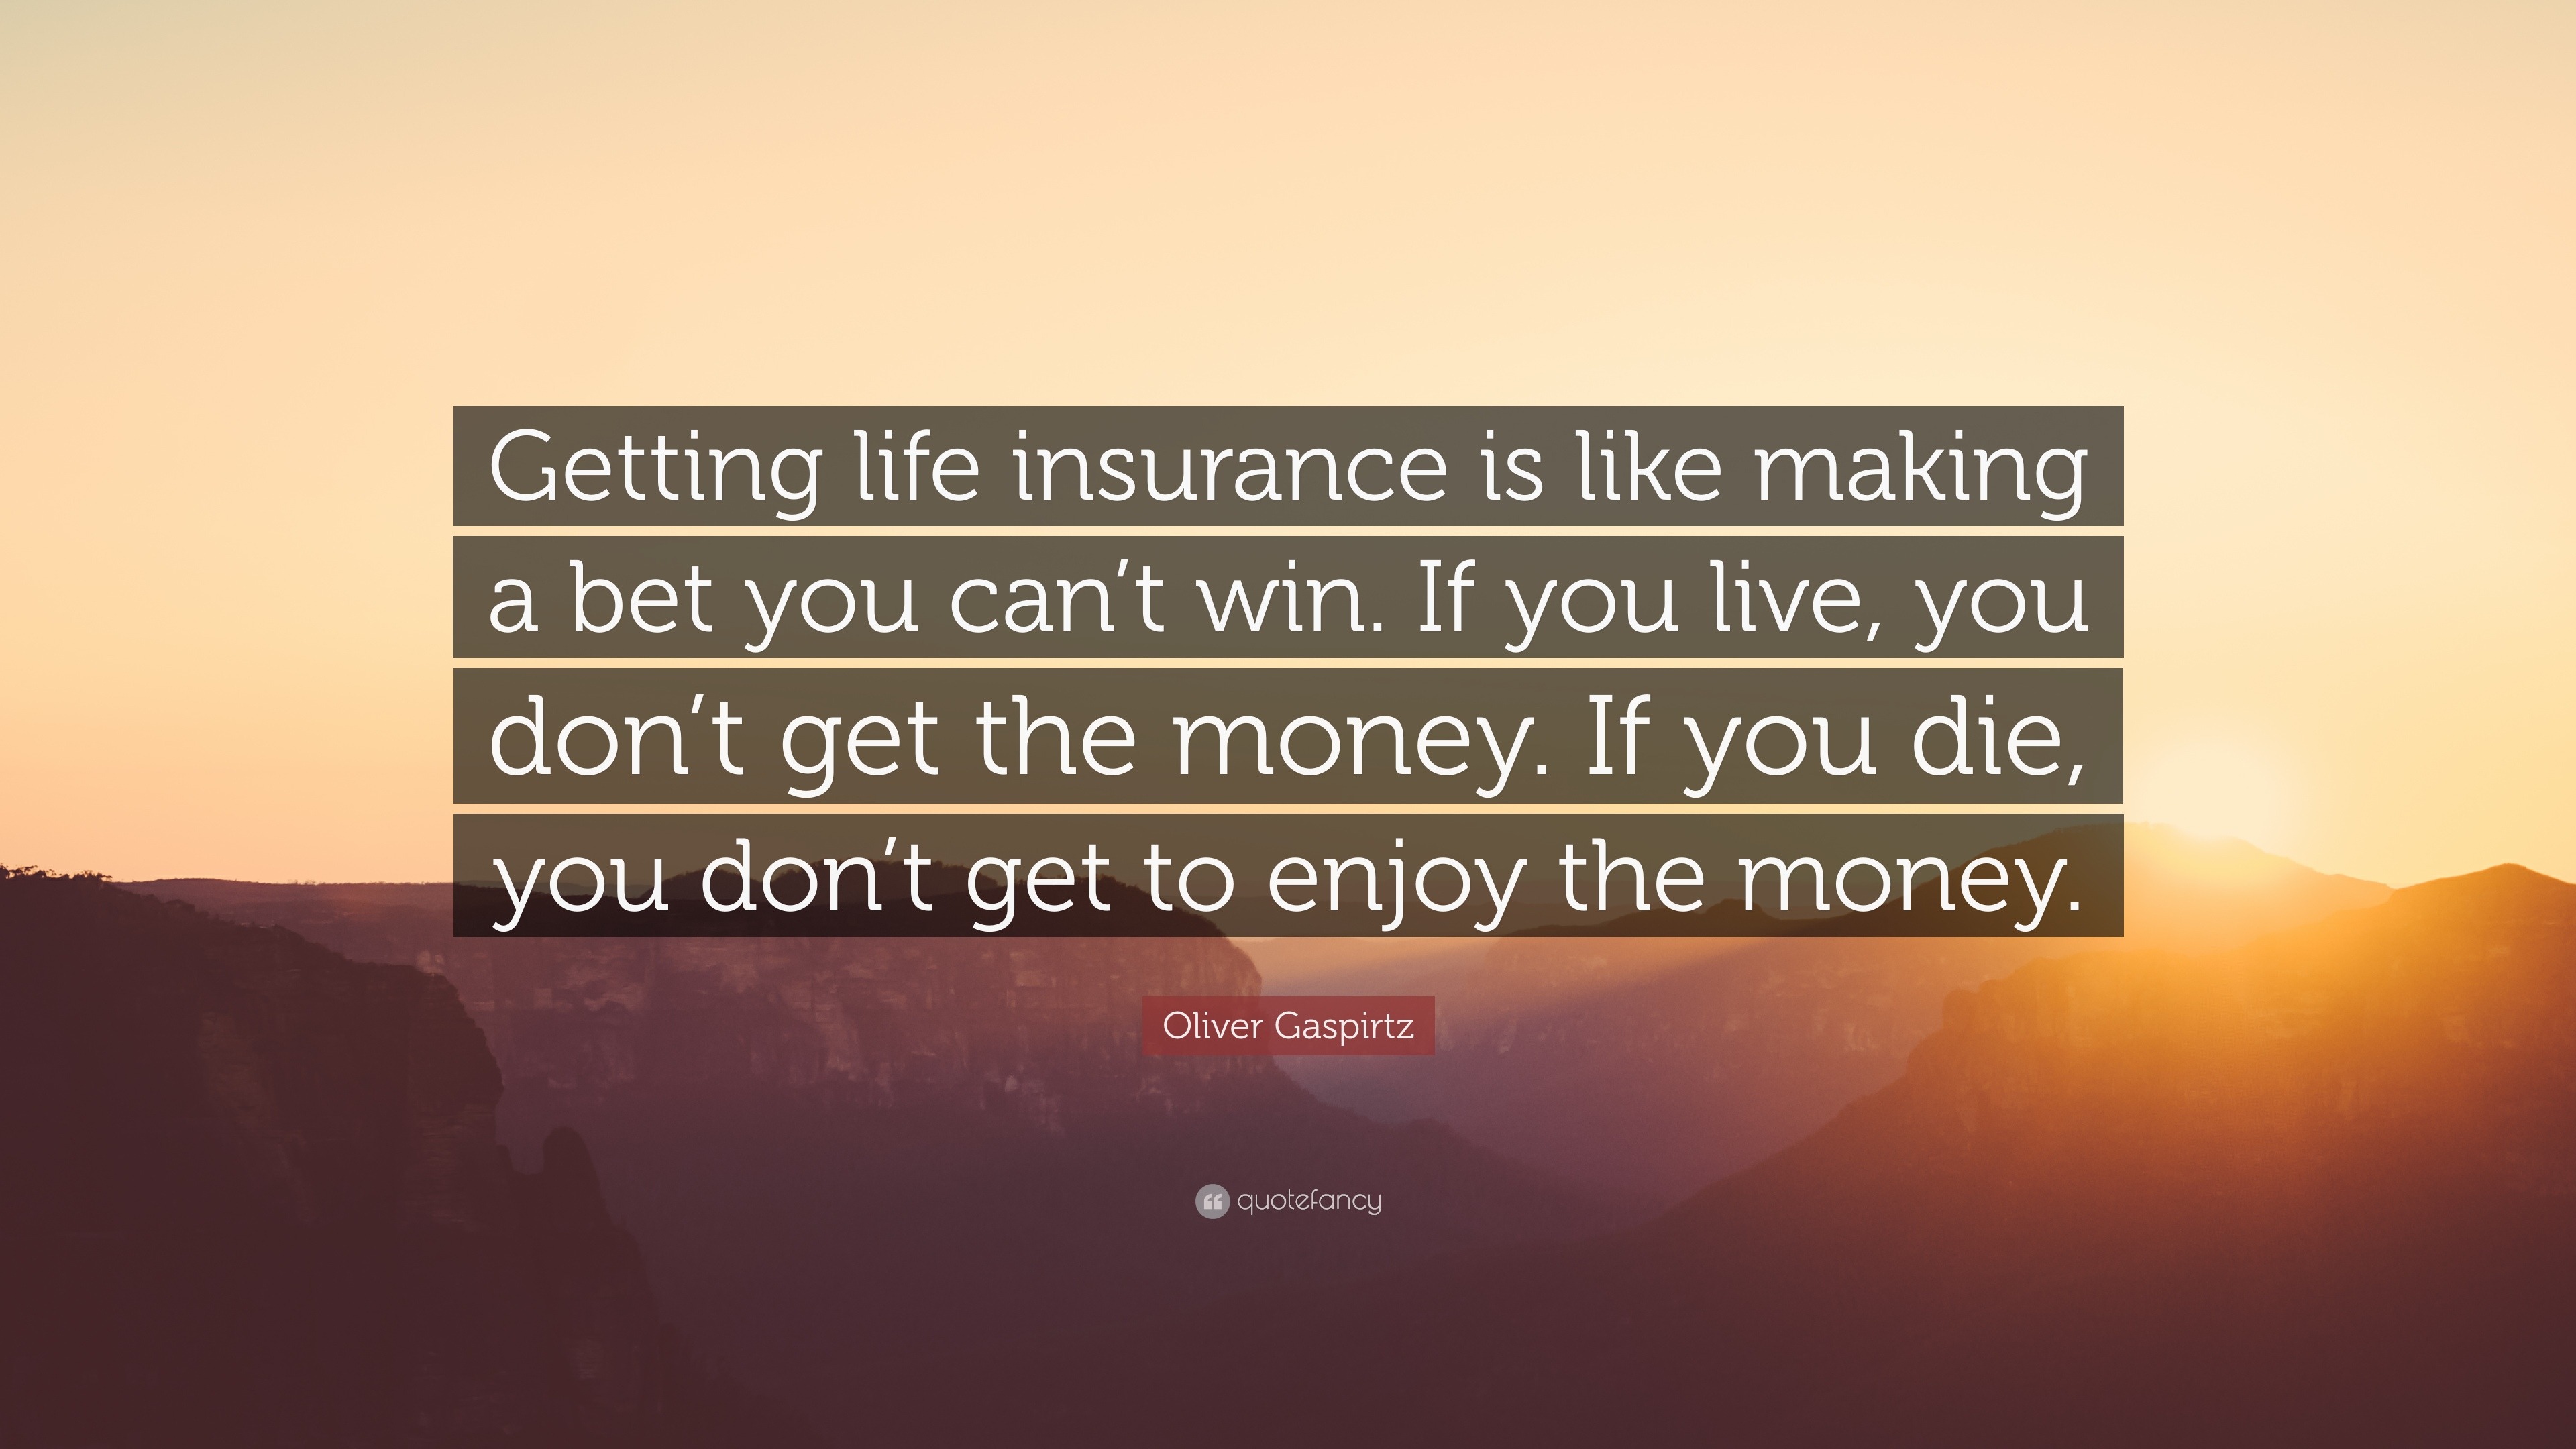 Oliver Gaspirtz Quote: "Getting life insurance is like ...